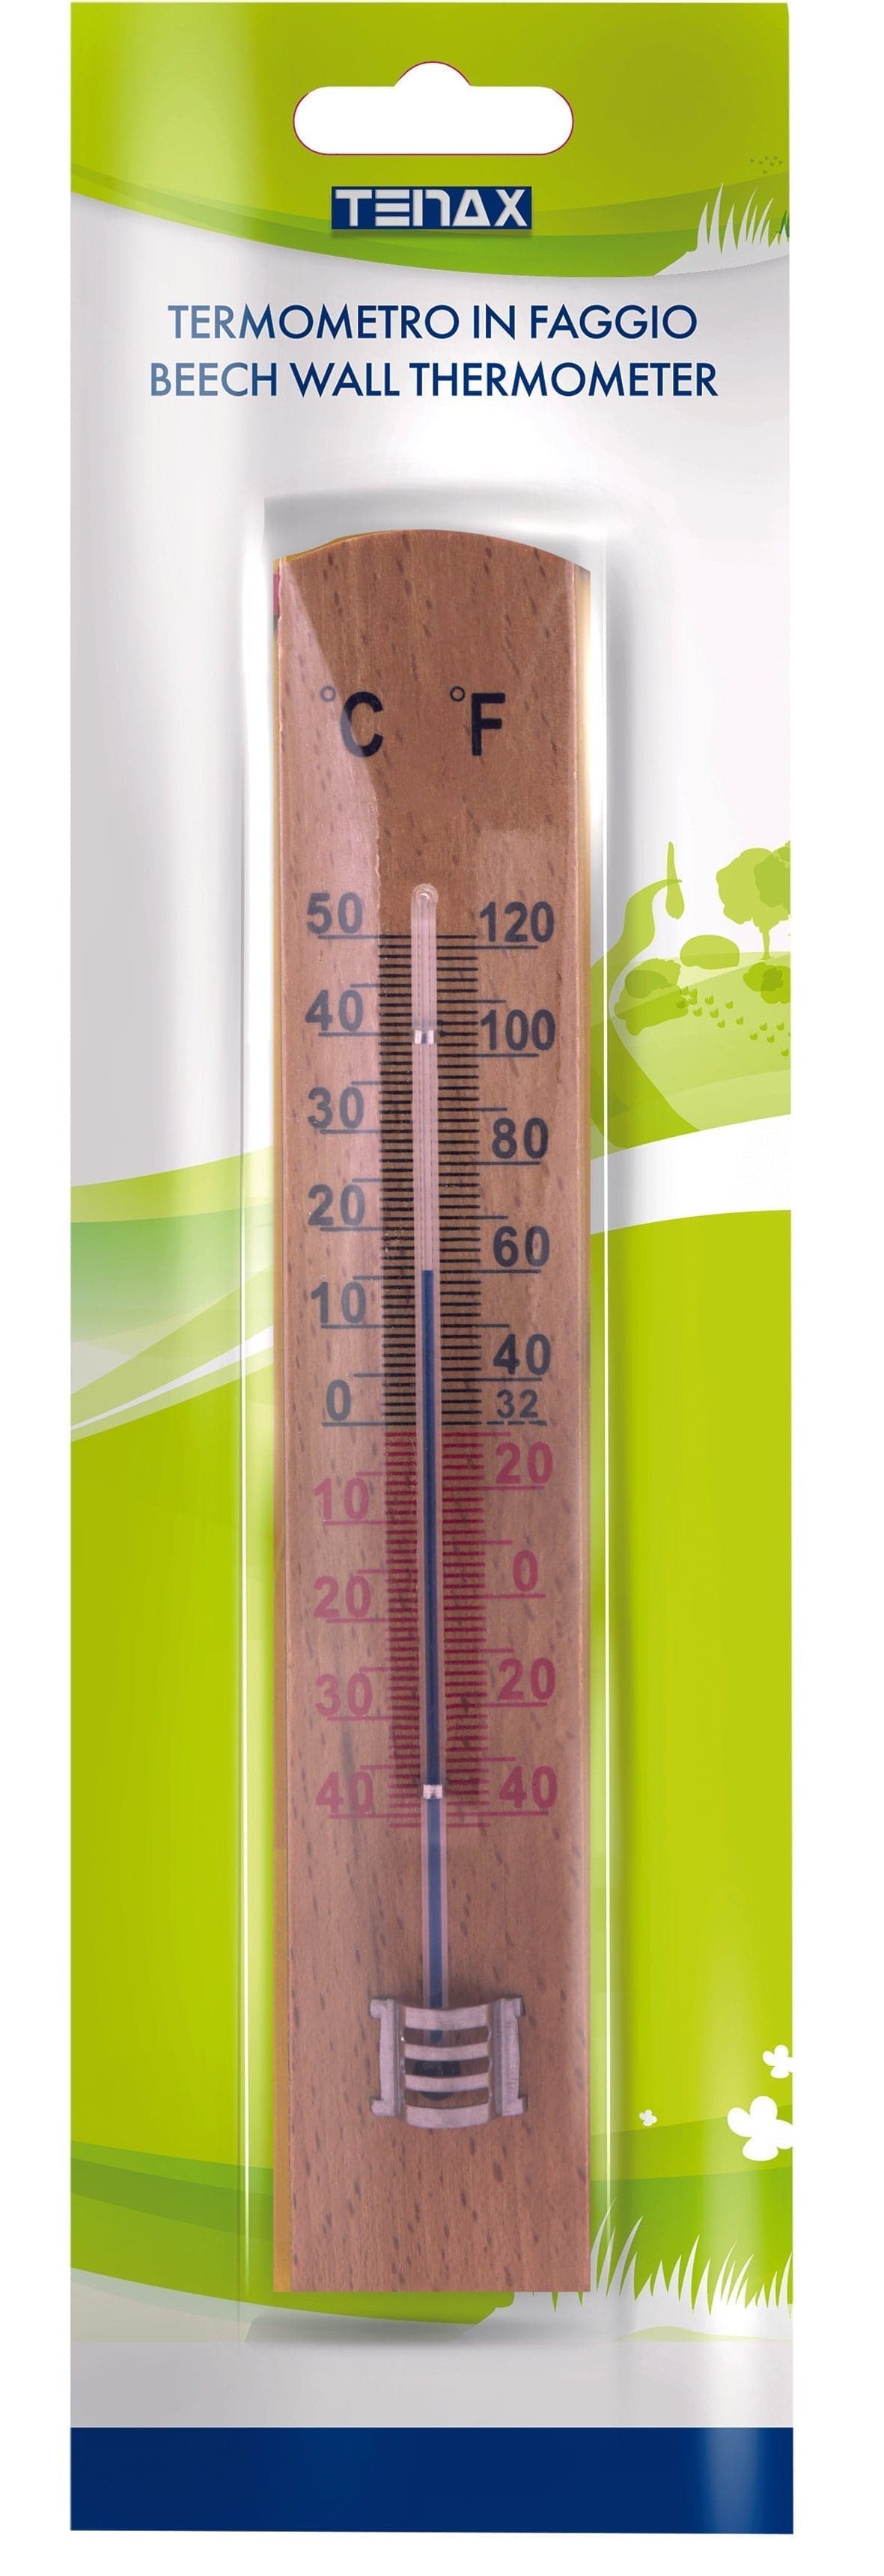 BEECH WALL THERMOMETER - best price from Maltashopper.com BR500500106